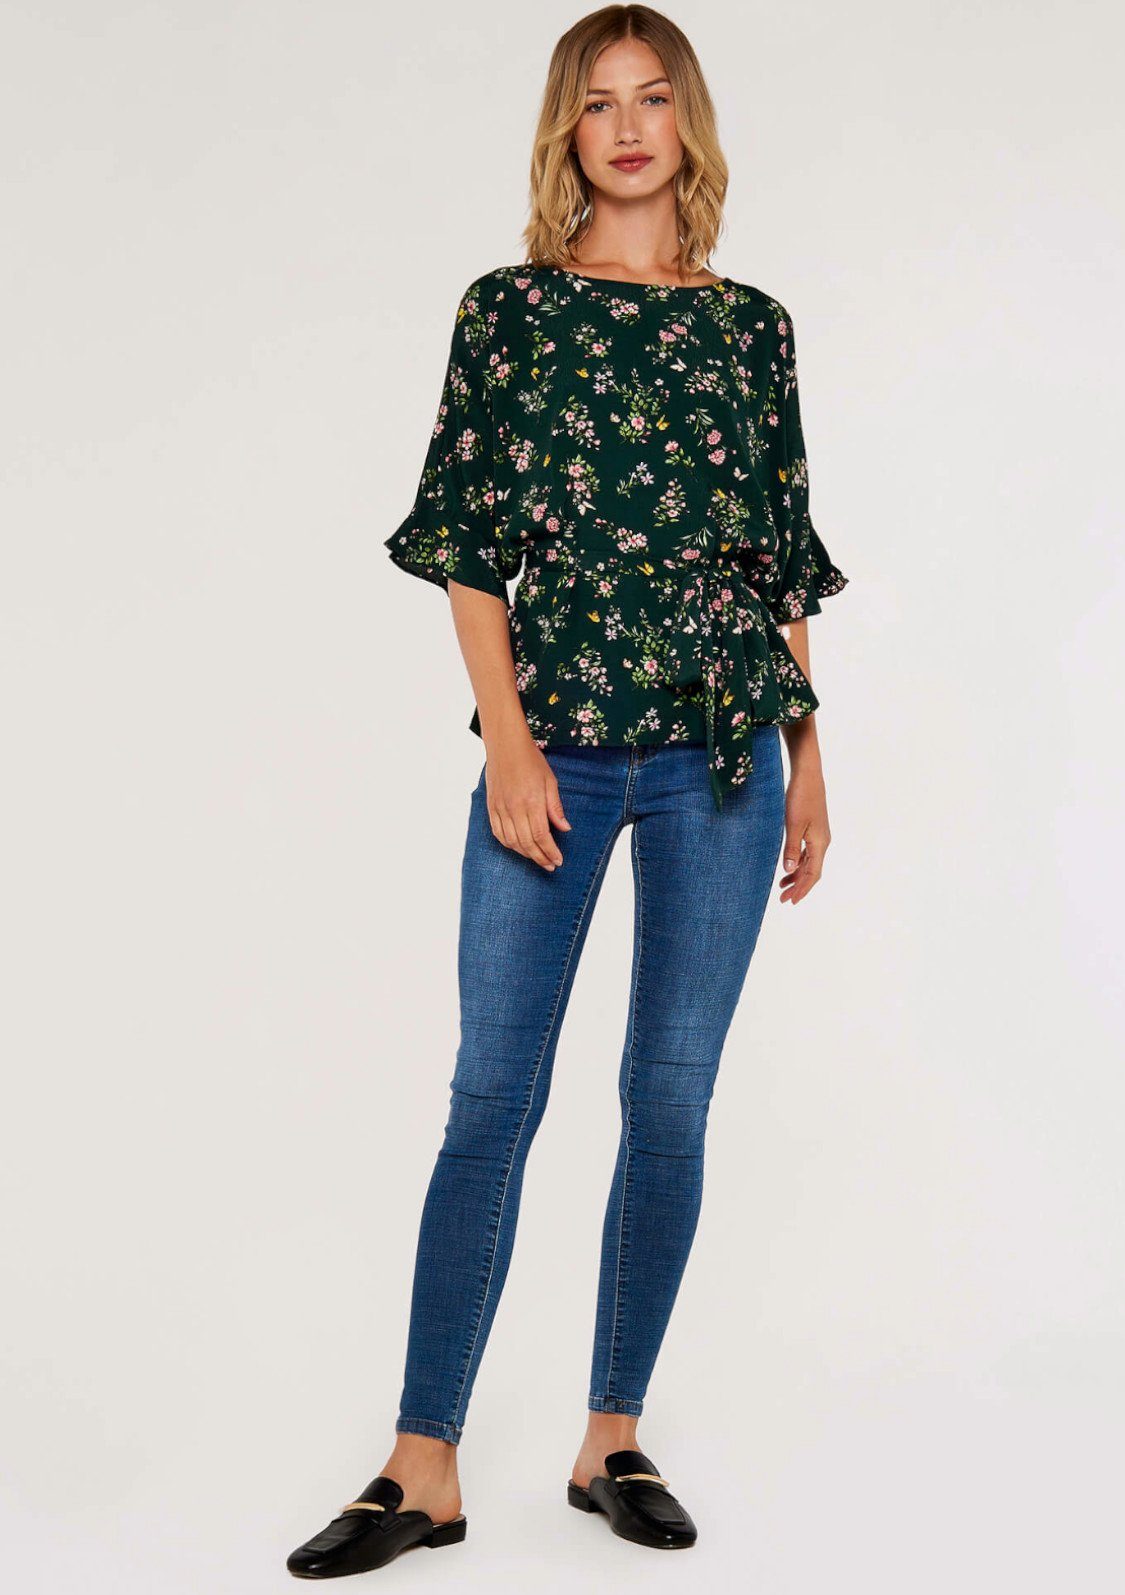 Self Floral Tiered (2-tlg) Blusentop Schleife Soft Tie Apricot Top mit